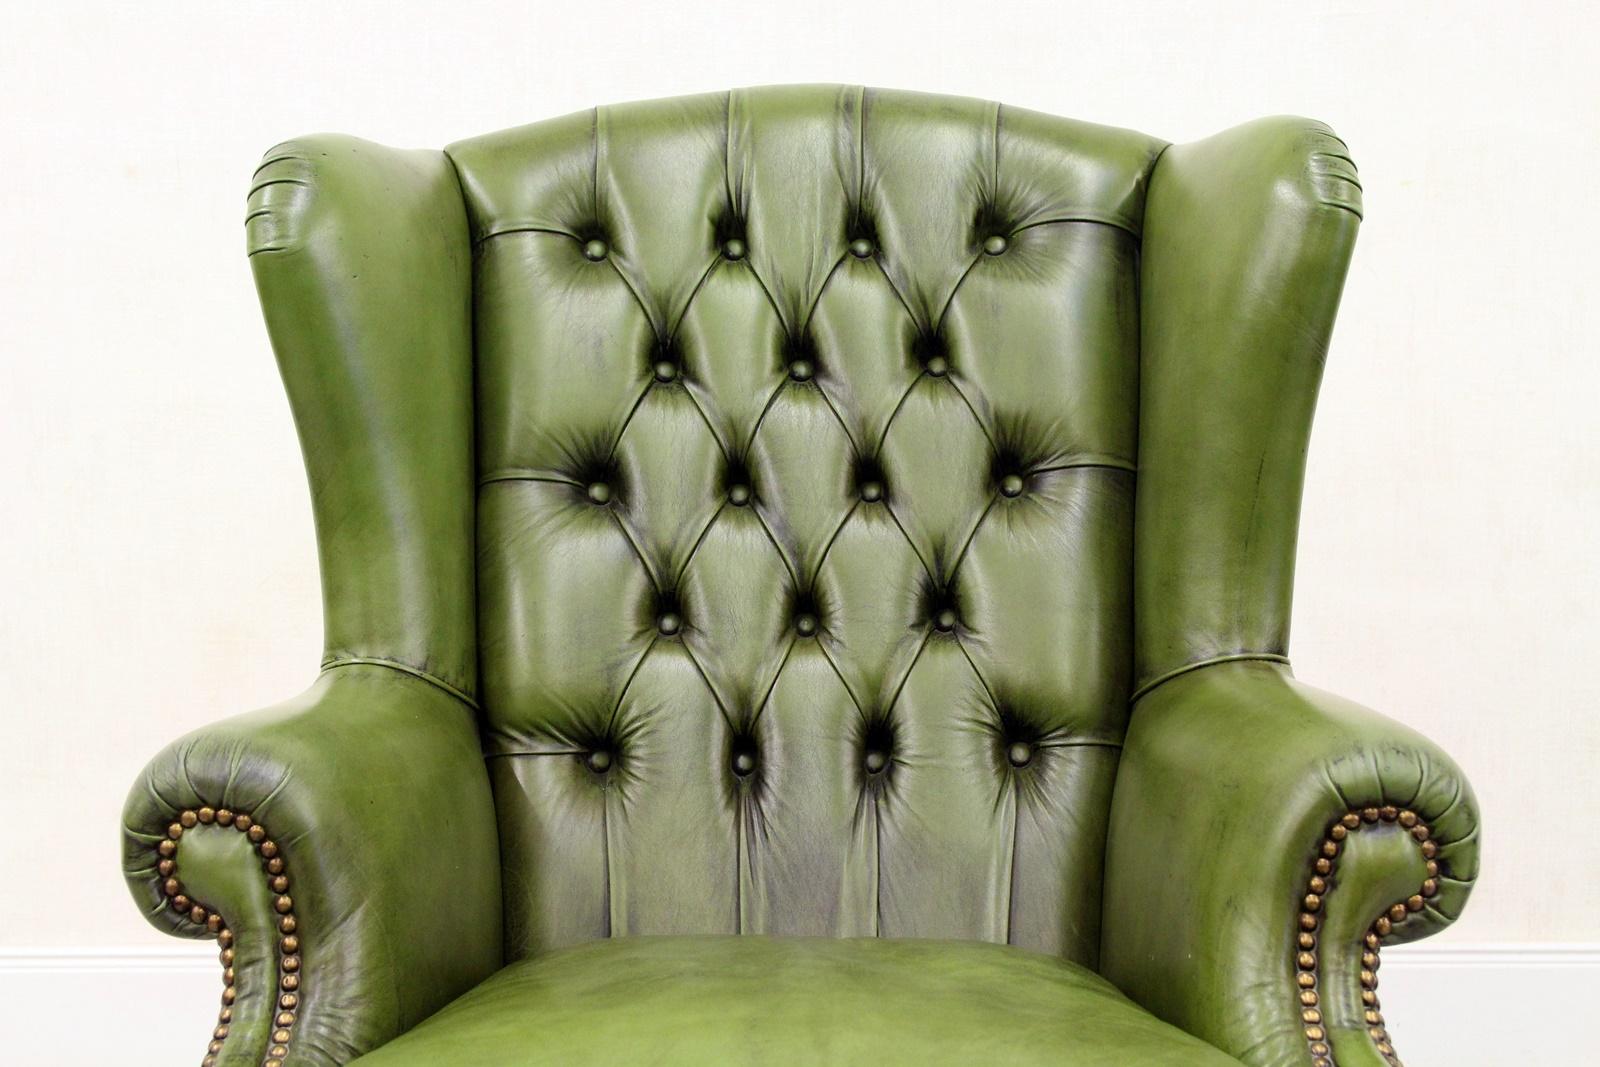 Chesterfield armchair (new old)
The shape is classic (wing chair)
armchair
Measures: Heightx100cm widthx75cm depthx95cm
Color green
Pillows: down pillows
Condition: The chair is in a very good condition for the age and still has the charm of